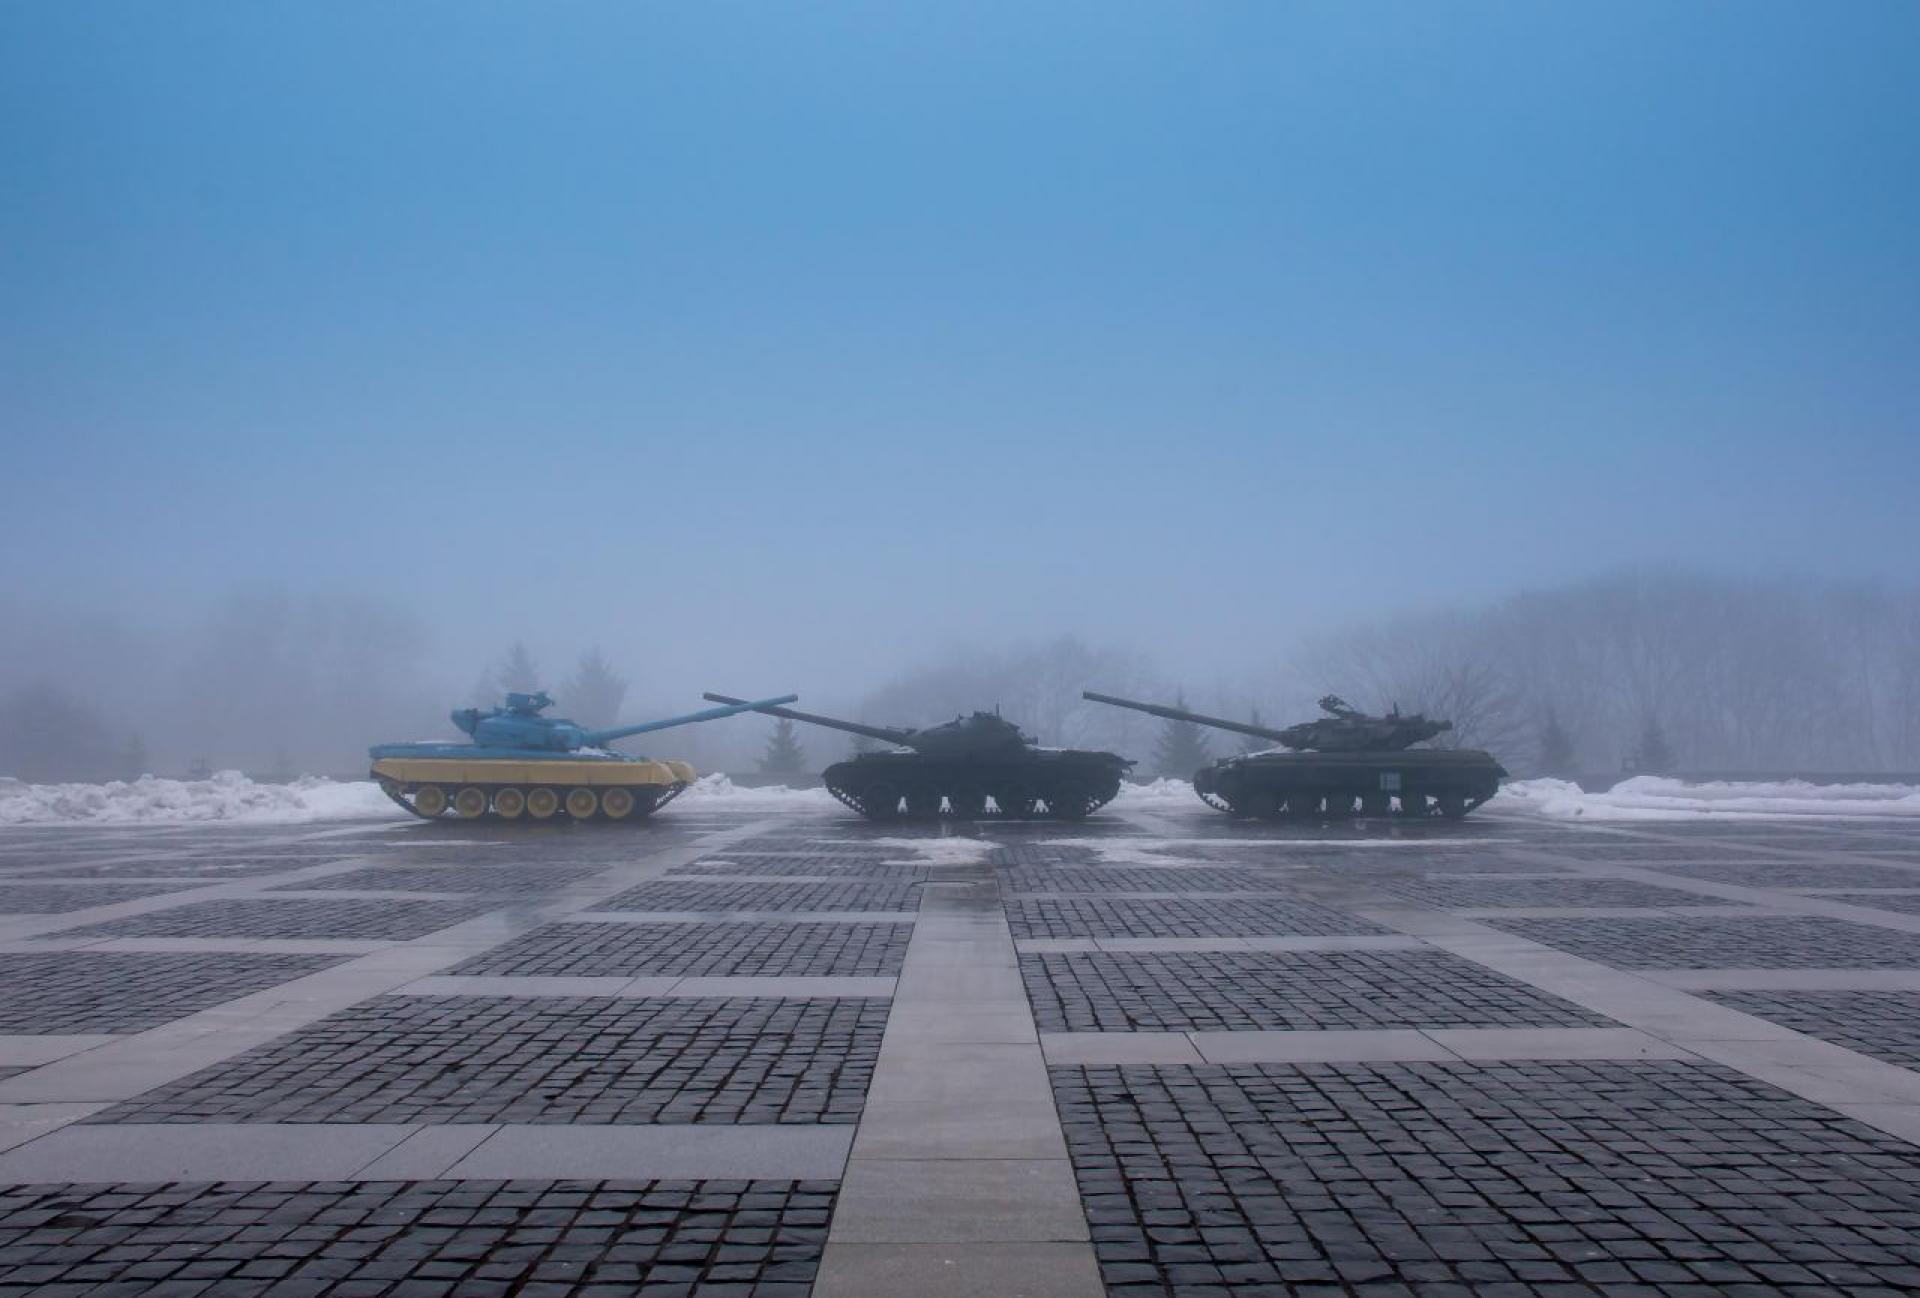 Tanks in the courtyard of the War Museum